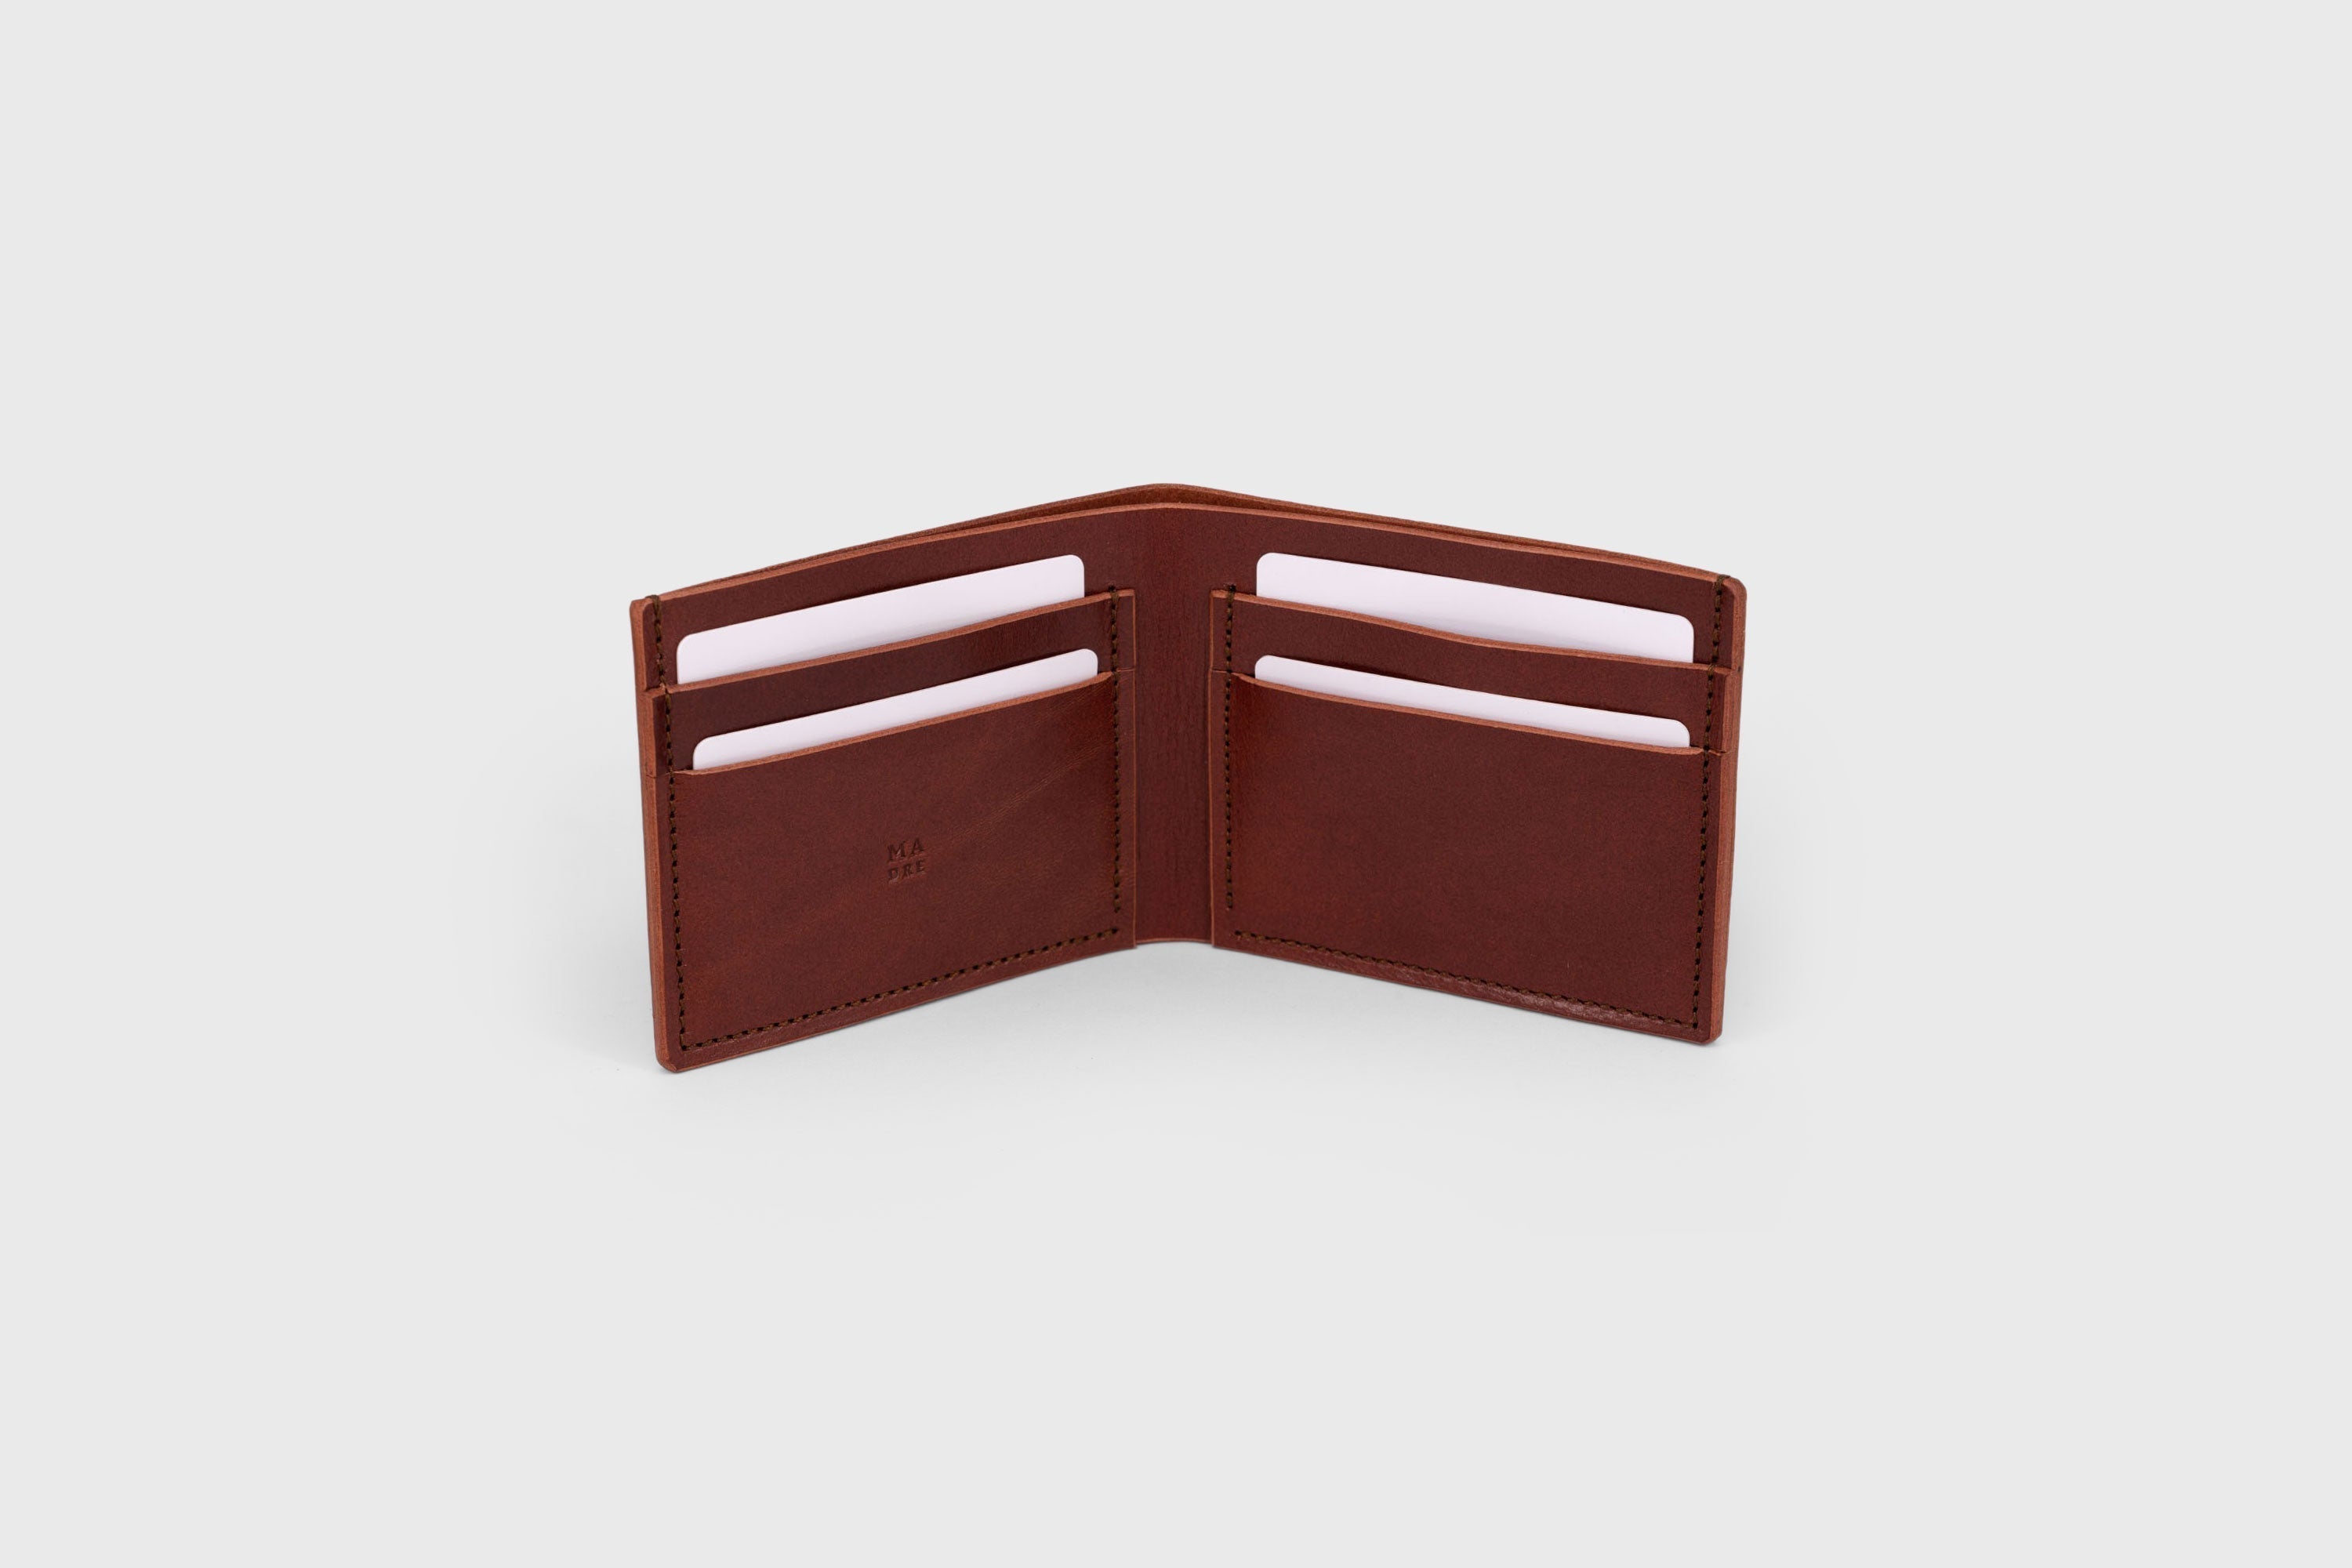 Bifold Wallet Dark Brown Leather Vegetable Tanned Leather Premium Classic Design and Handcrafted By Atelier Madre Manuel Dreeesmann Barcelona Spain